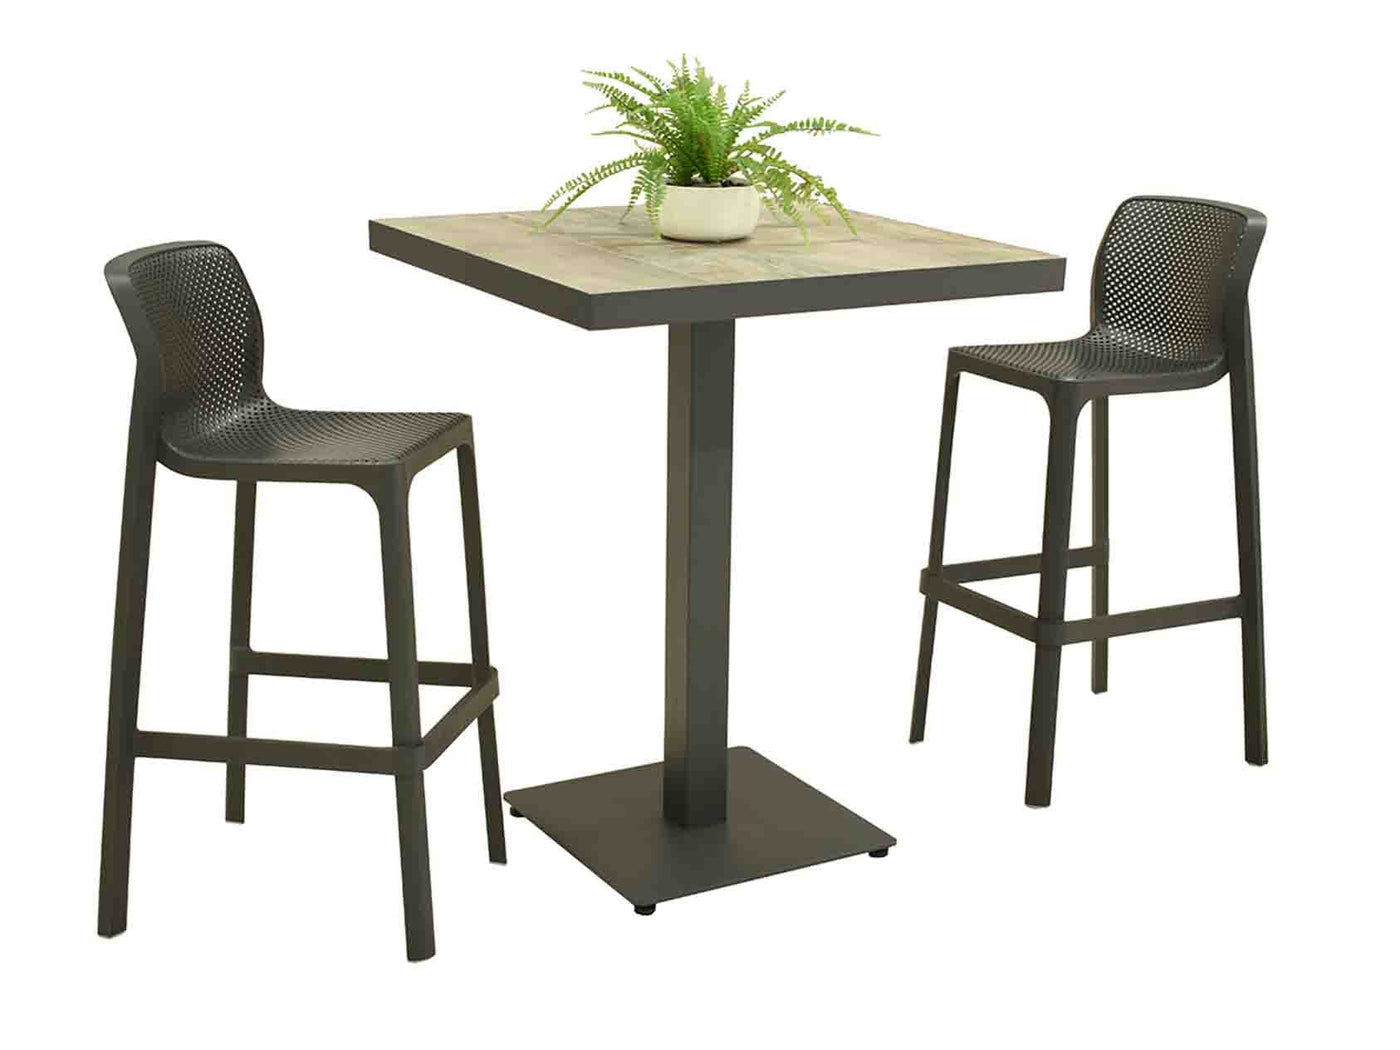 A square Clifton Bar Table with a wood-look ceramic top and a dark metal base, accompanied by two Nardi Net bar chairs with a unique perforated design. A small potted fern decorates the table.